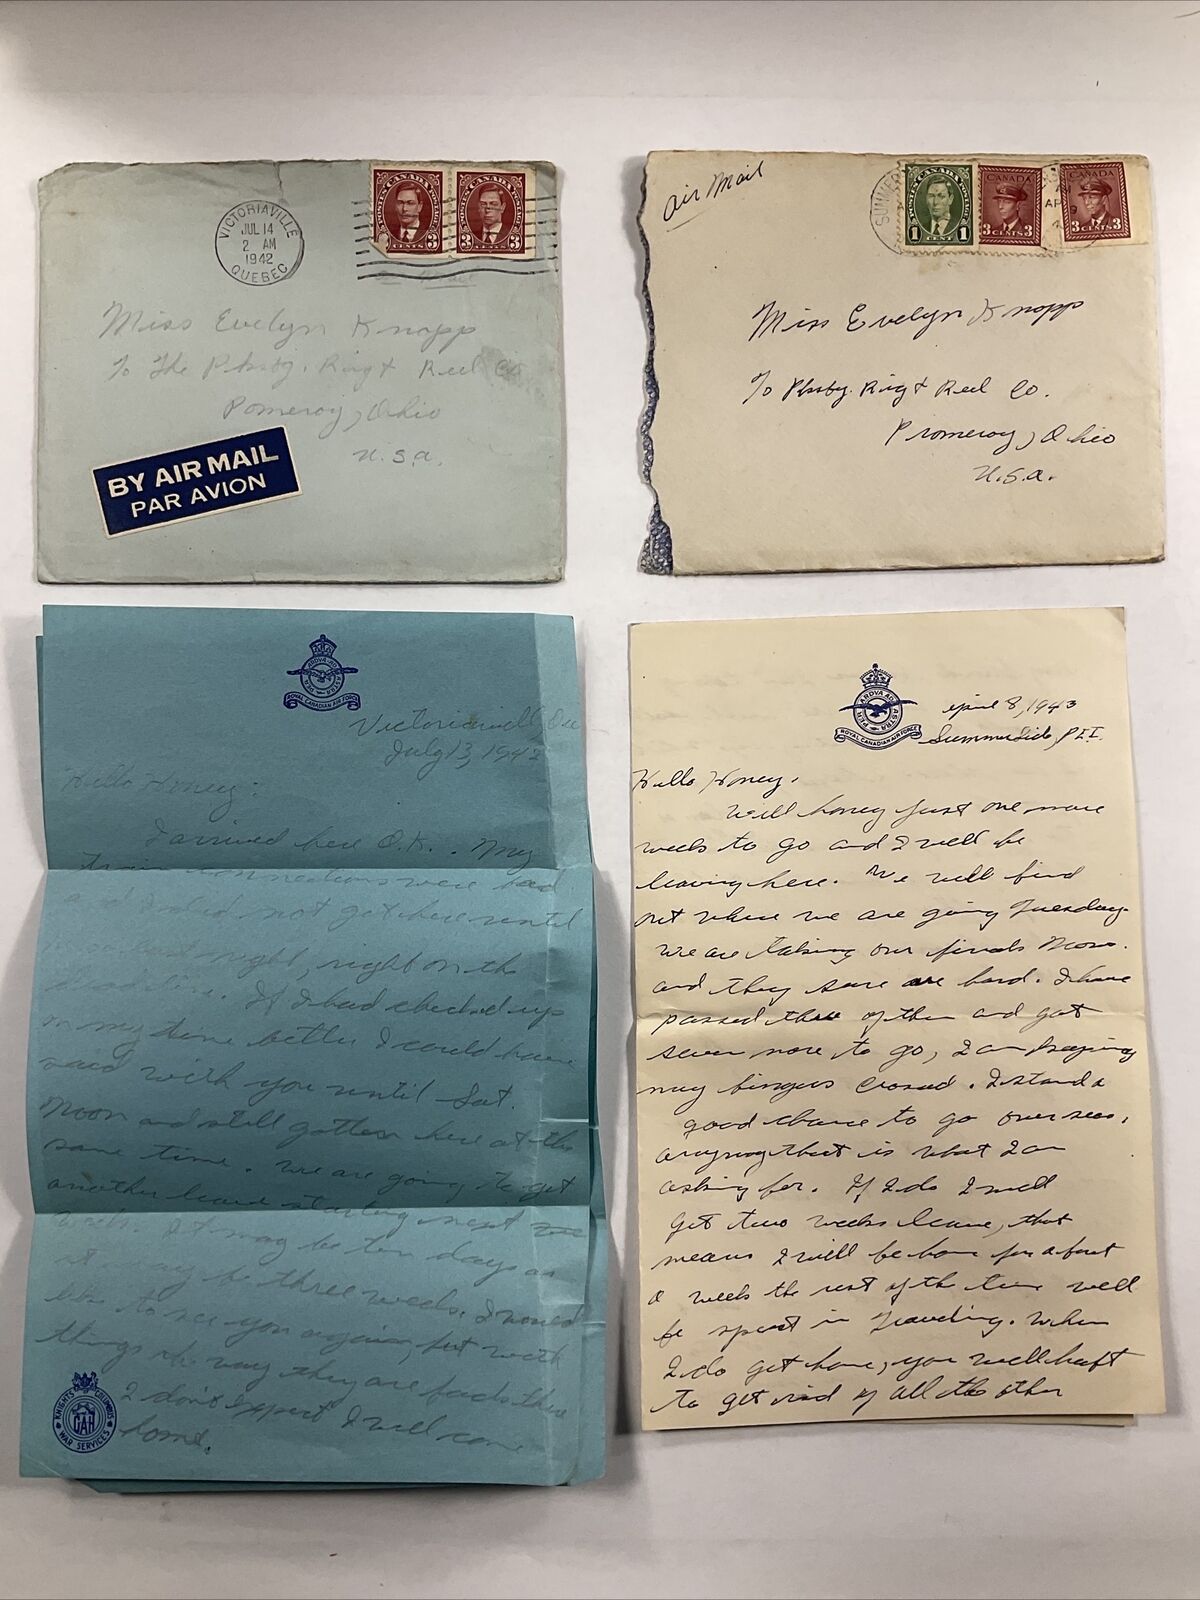 1942 43 2 WWII Letters from Royal Canadian Air Force Soldier to Pomeroy, Ohio